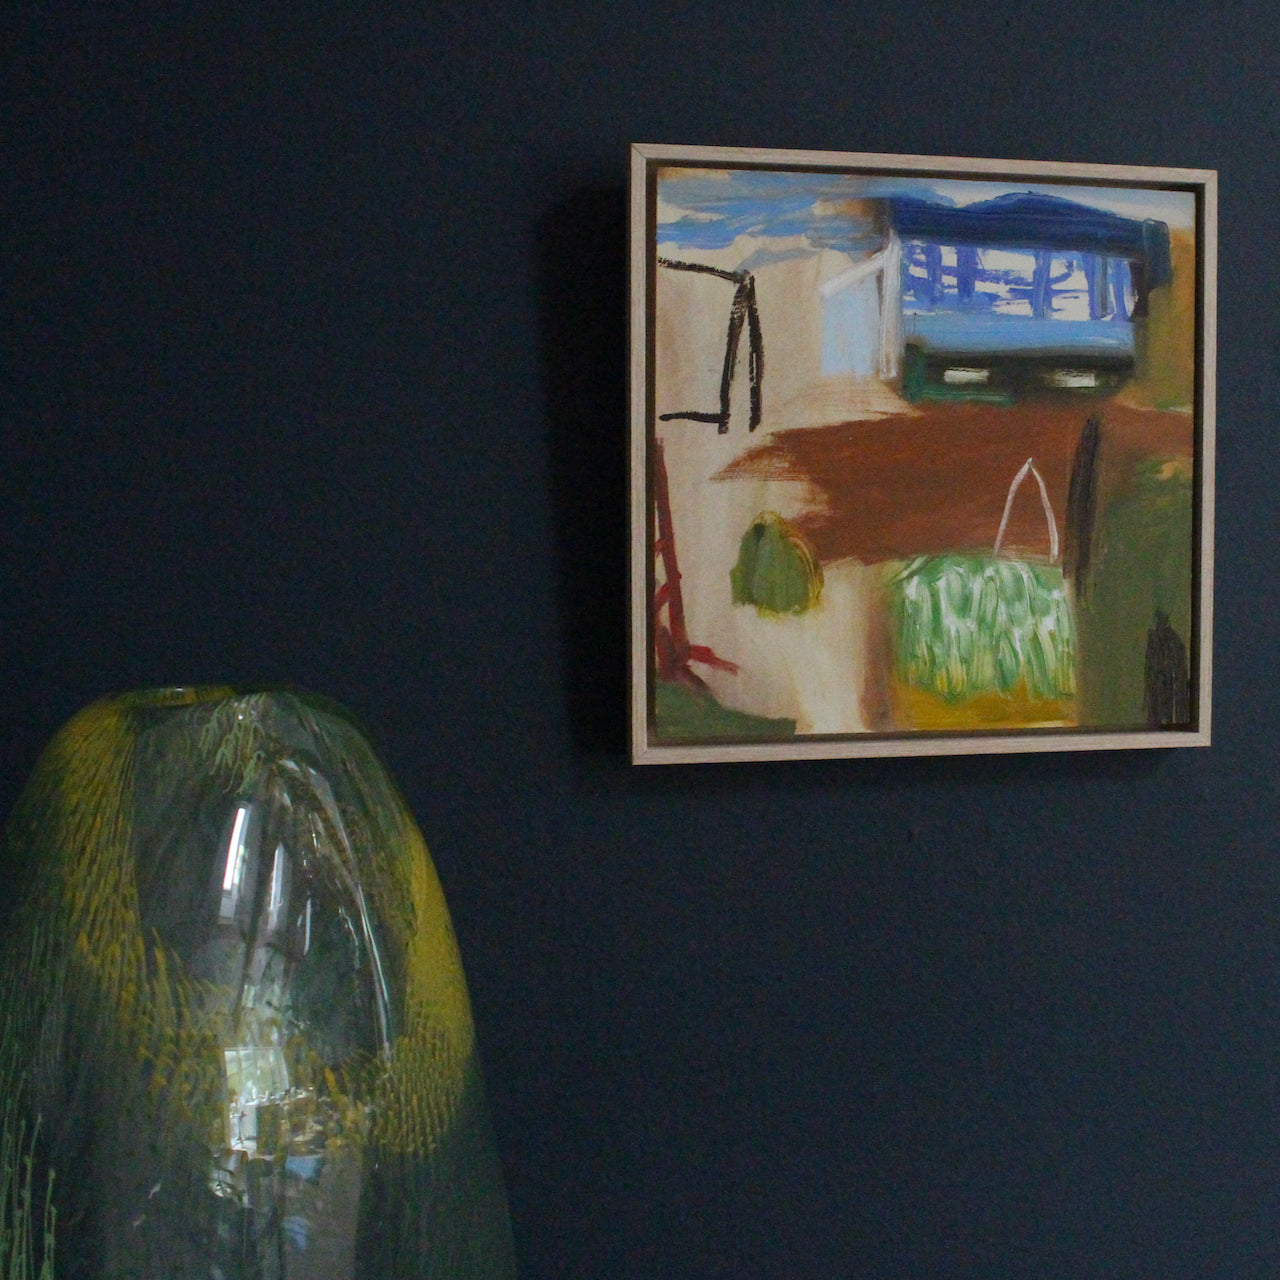 Abstract camping scene with tones of blue, ochre and green by Cornish artist Heath Hearn.